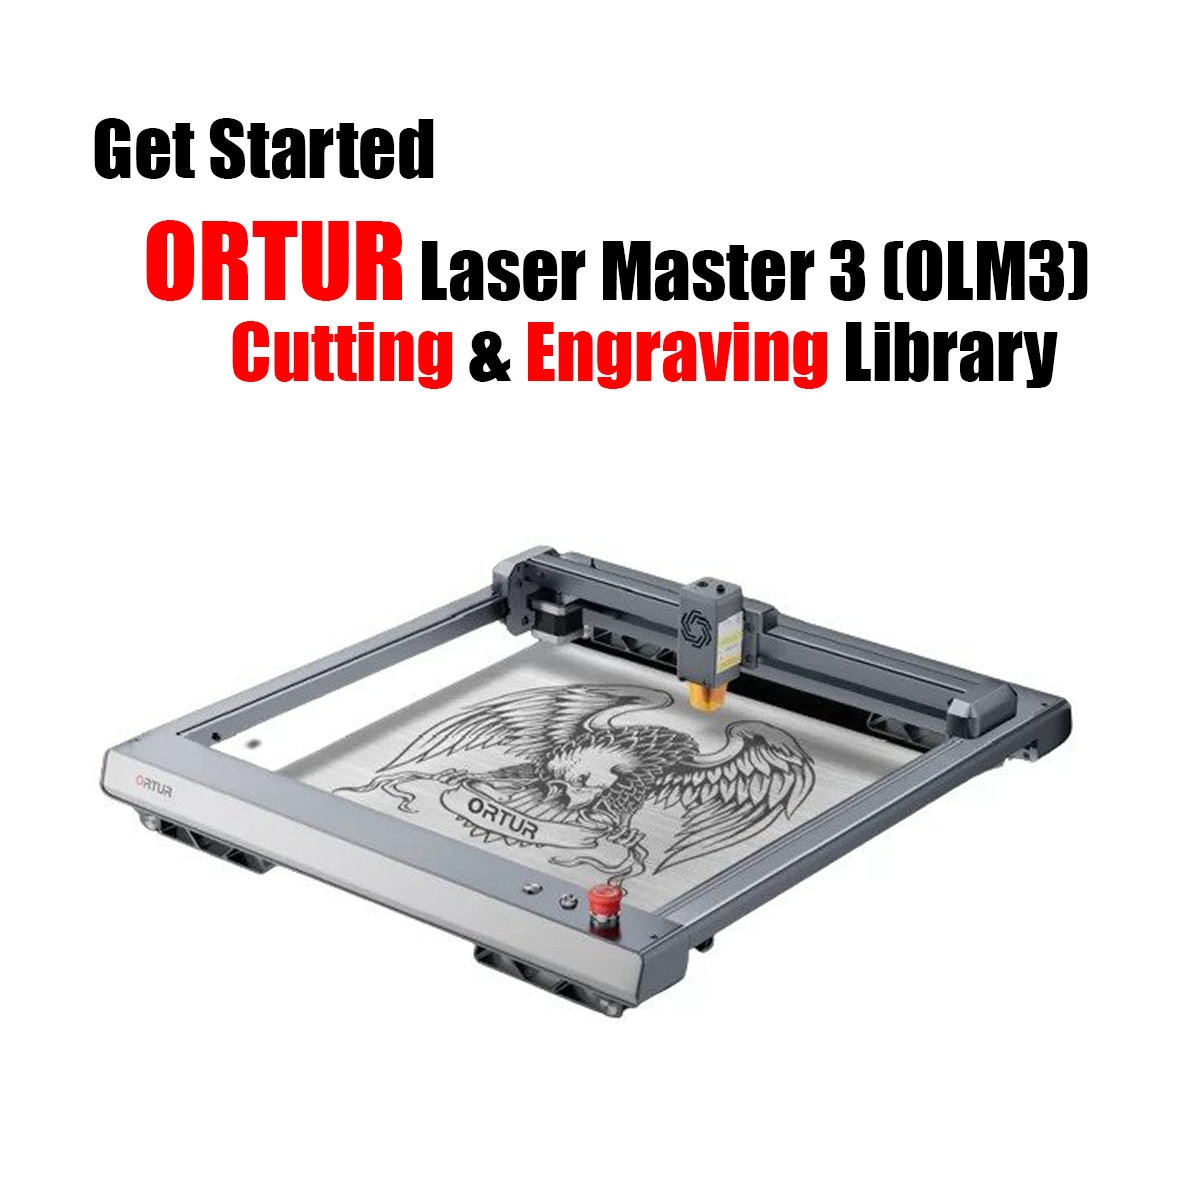 Ortur Laser Master 3 OLM3 Cut & Engraving Library and Install